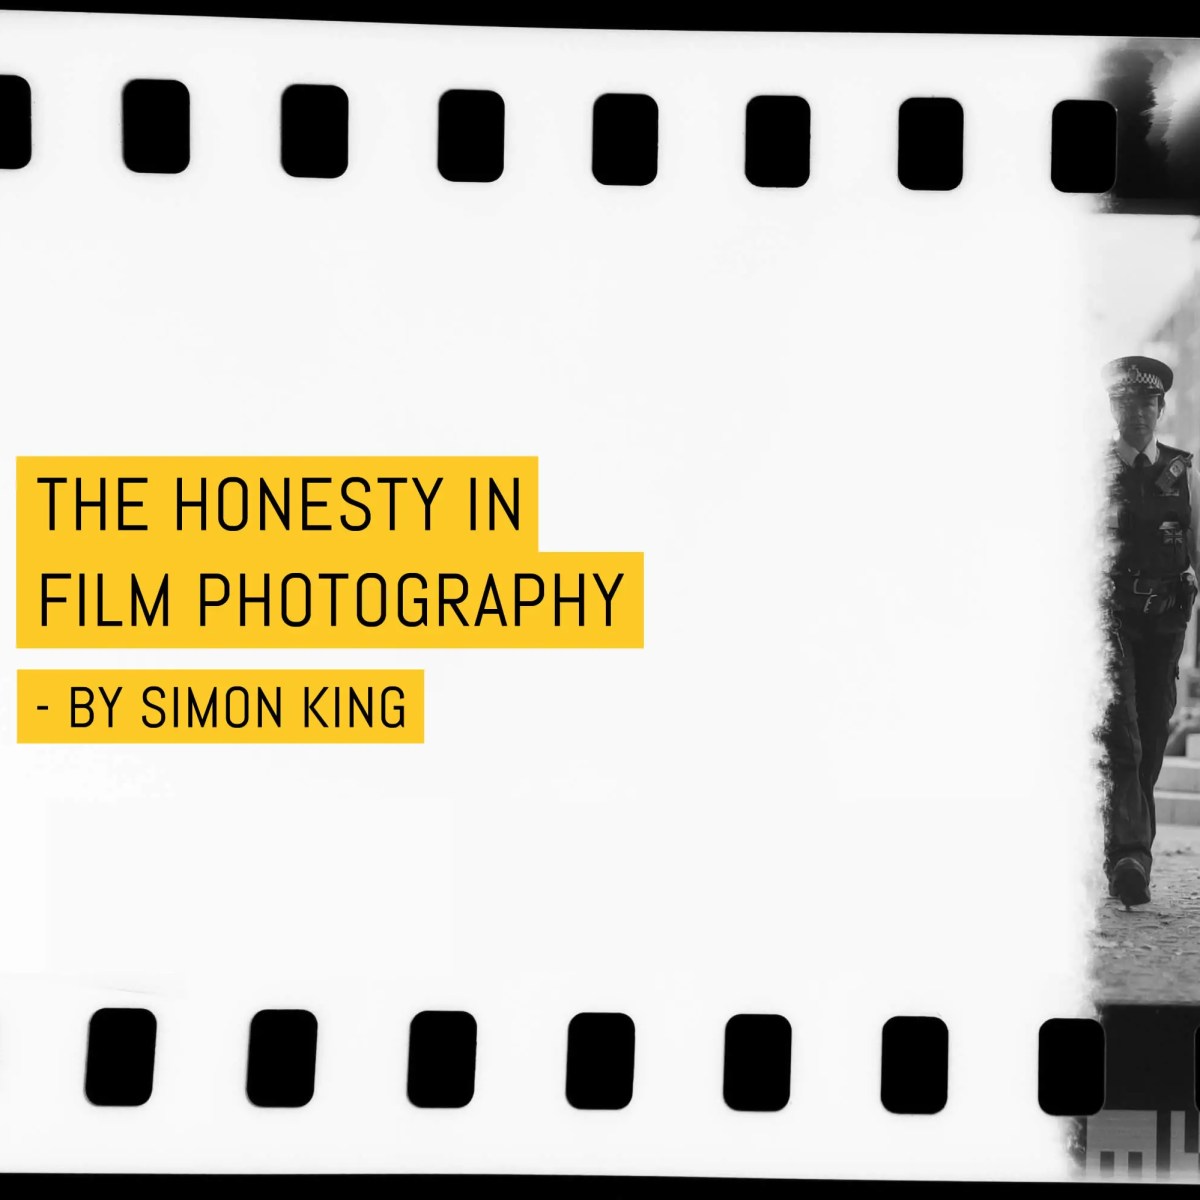 The honesty in film photography - by Simon King